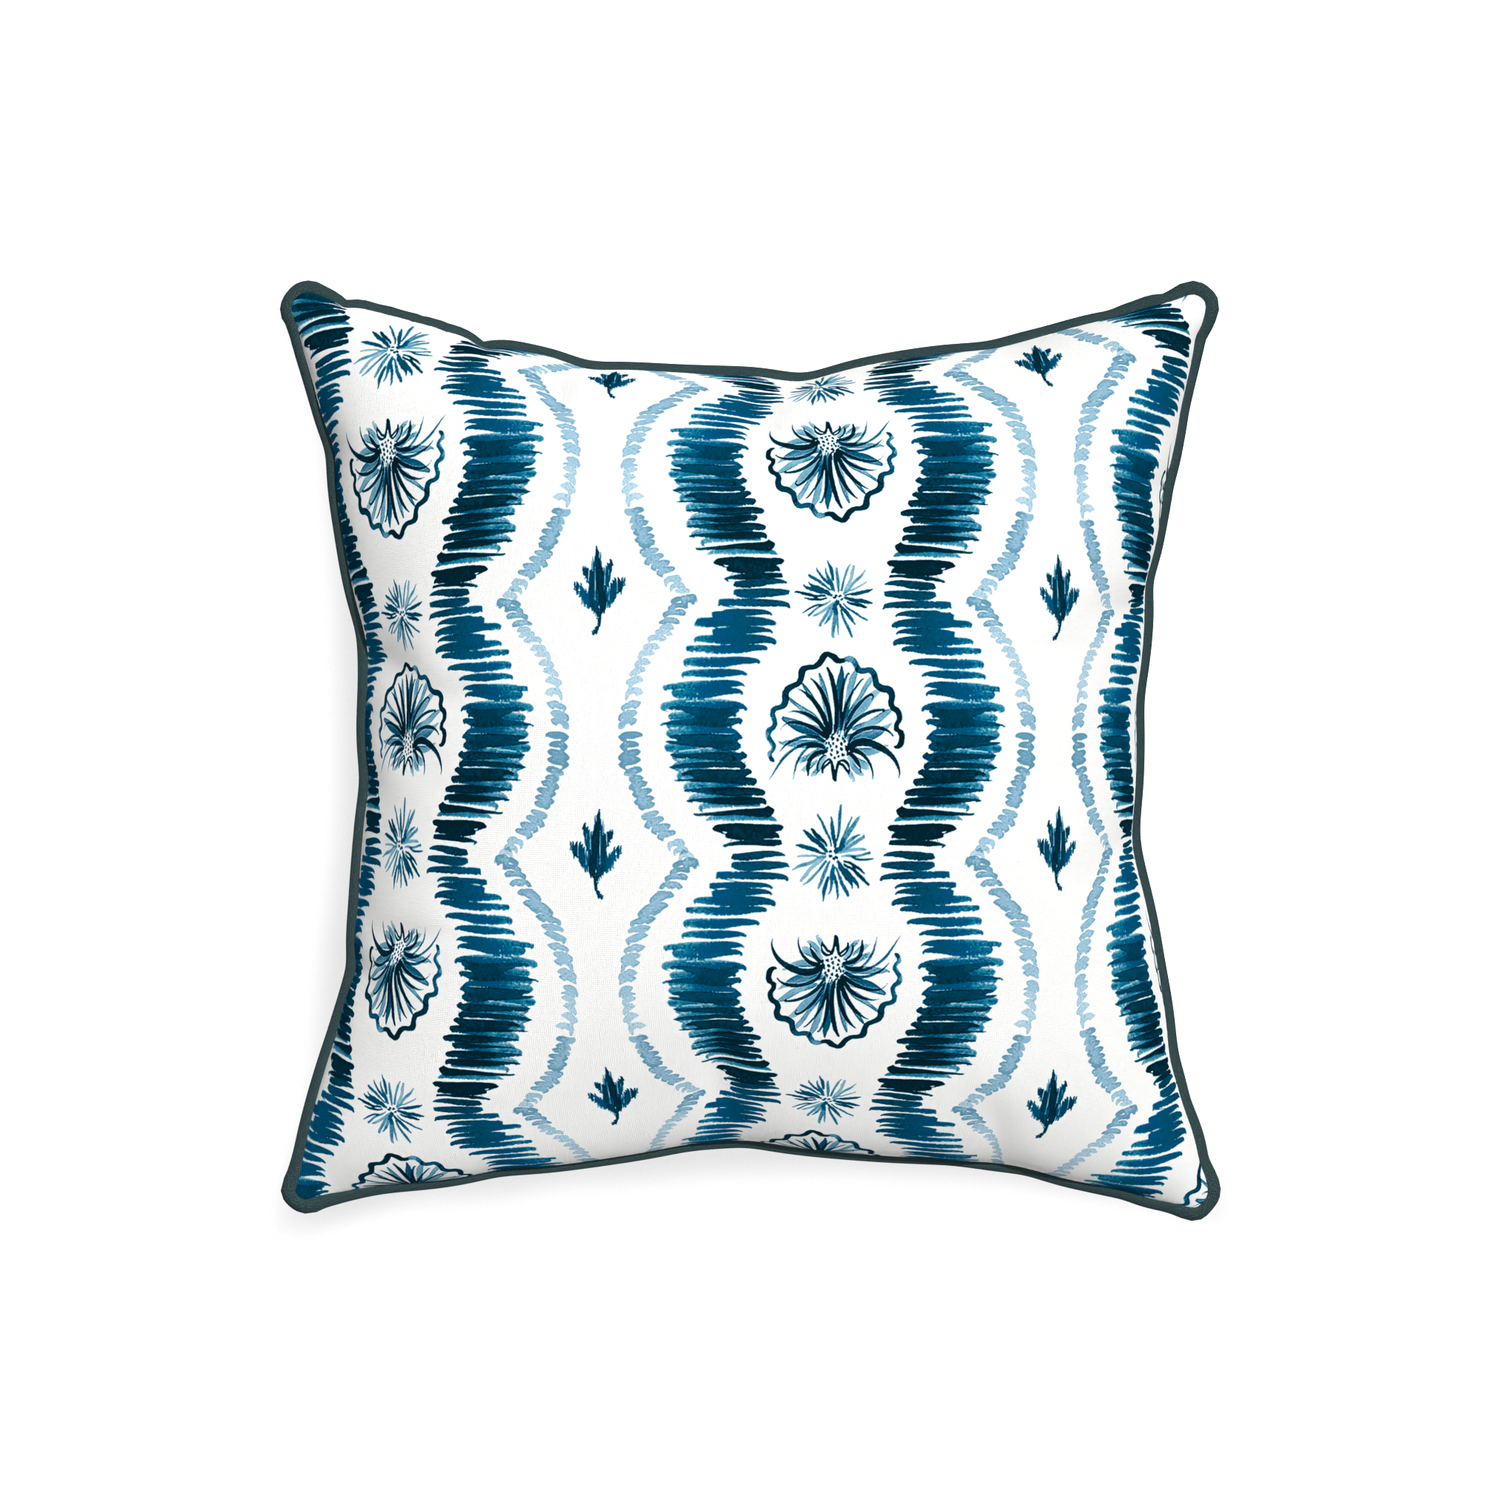 20-square alice custom blue ikatpillow with p piping on white background